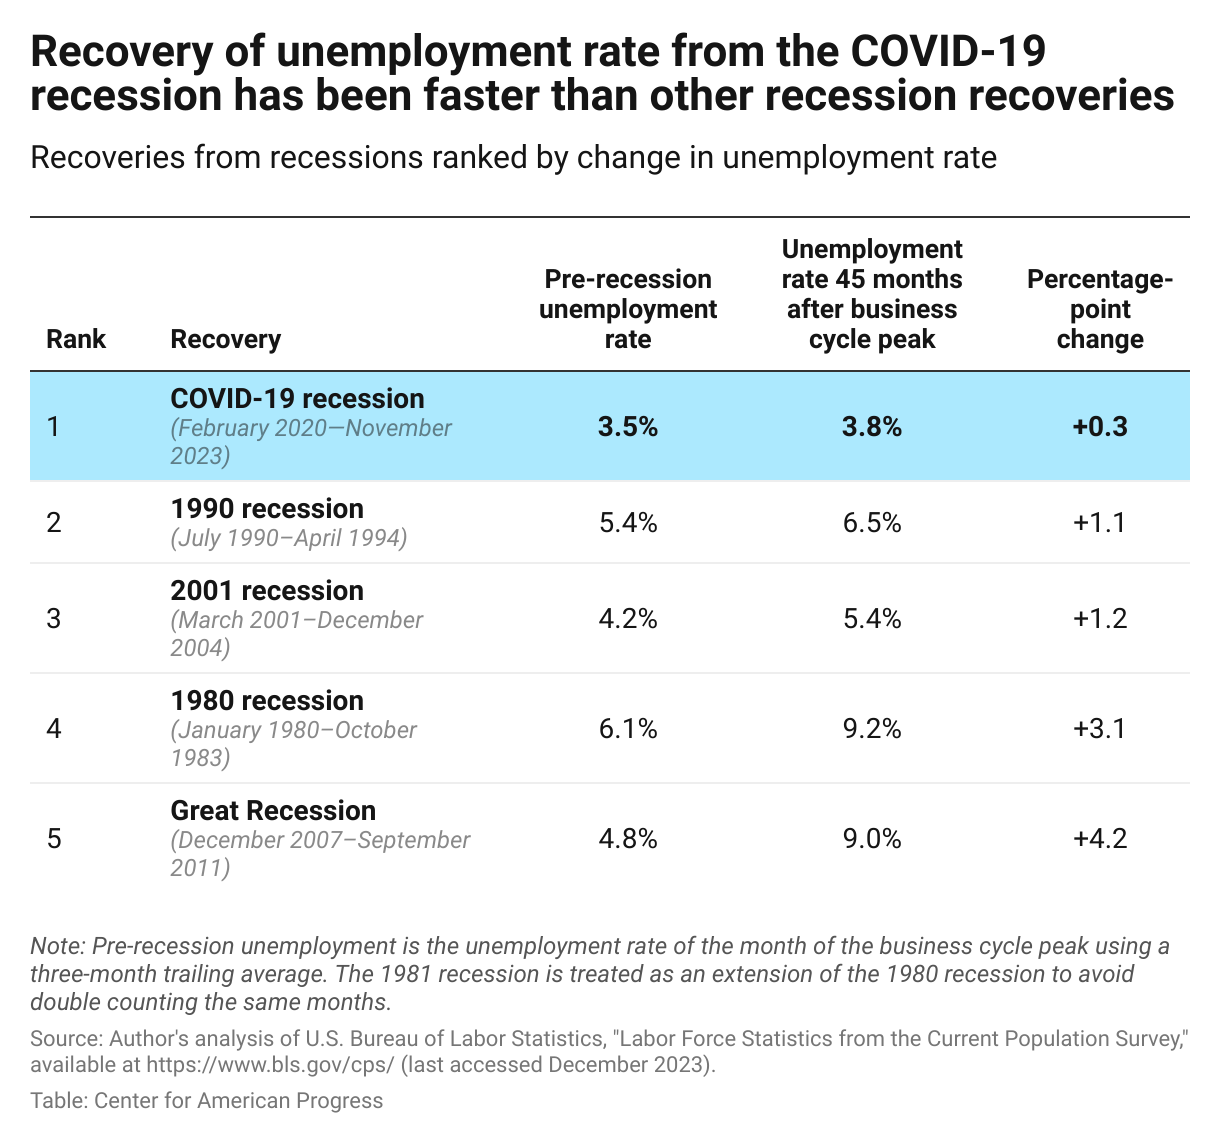 Table showing that the unemployment rate has almost returned to its level prior to the COVID-19 recession, which did not happen after other recent recessions.